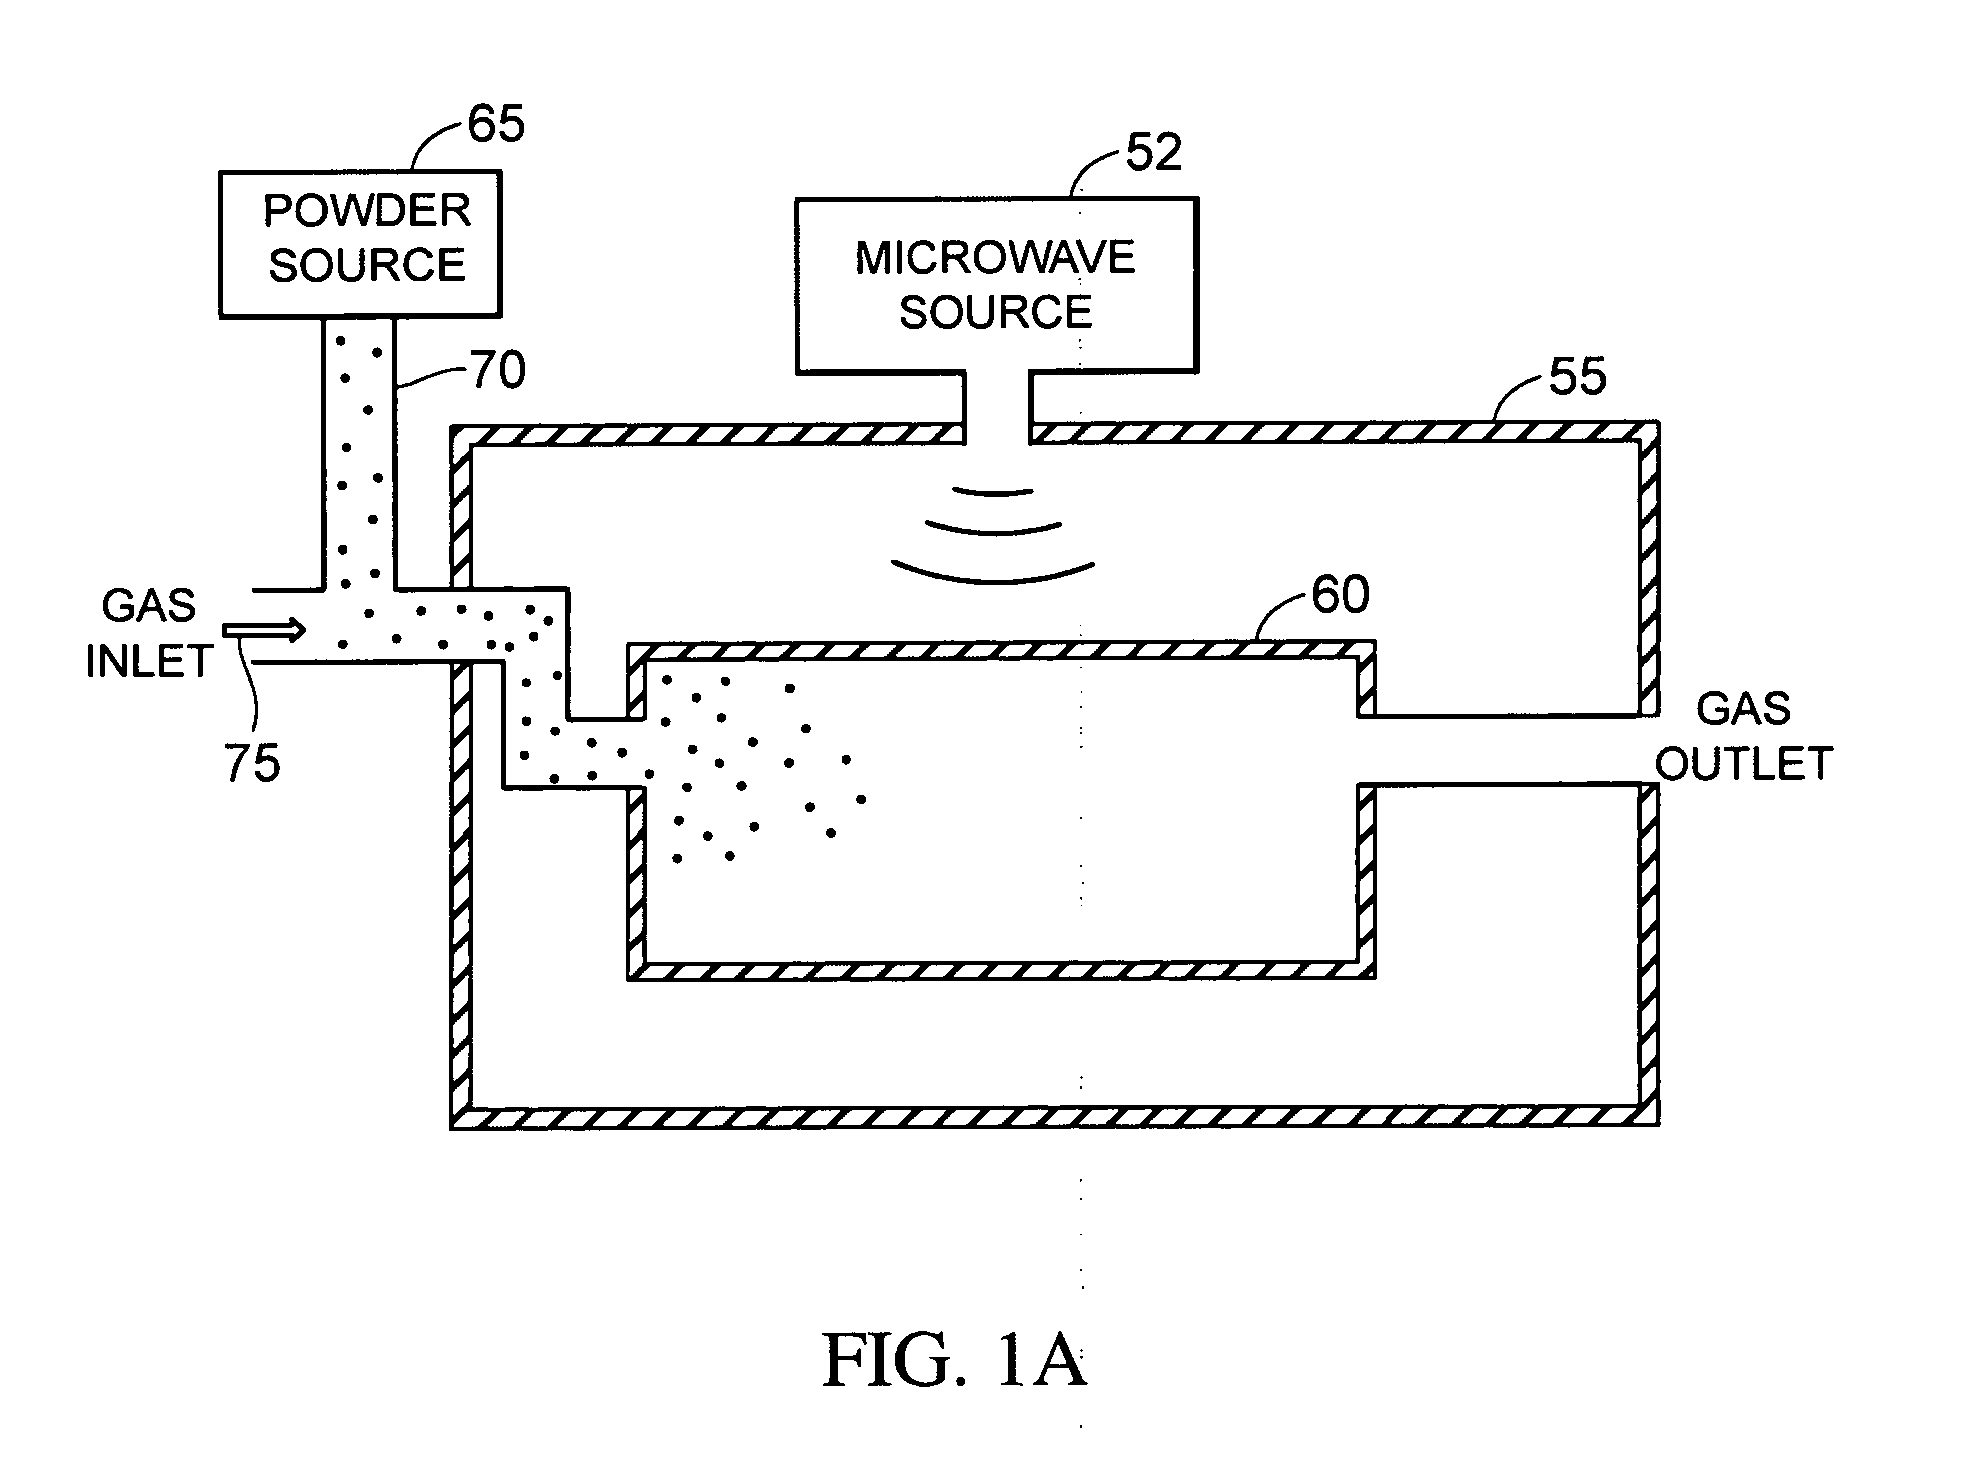 Plasma-assisted processing in a manufacturing line